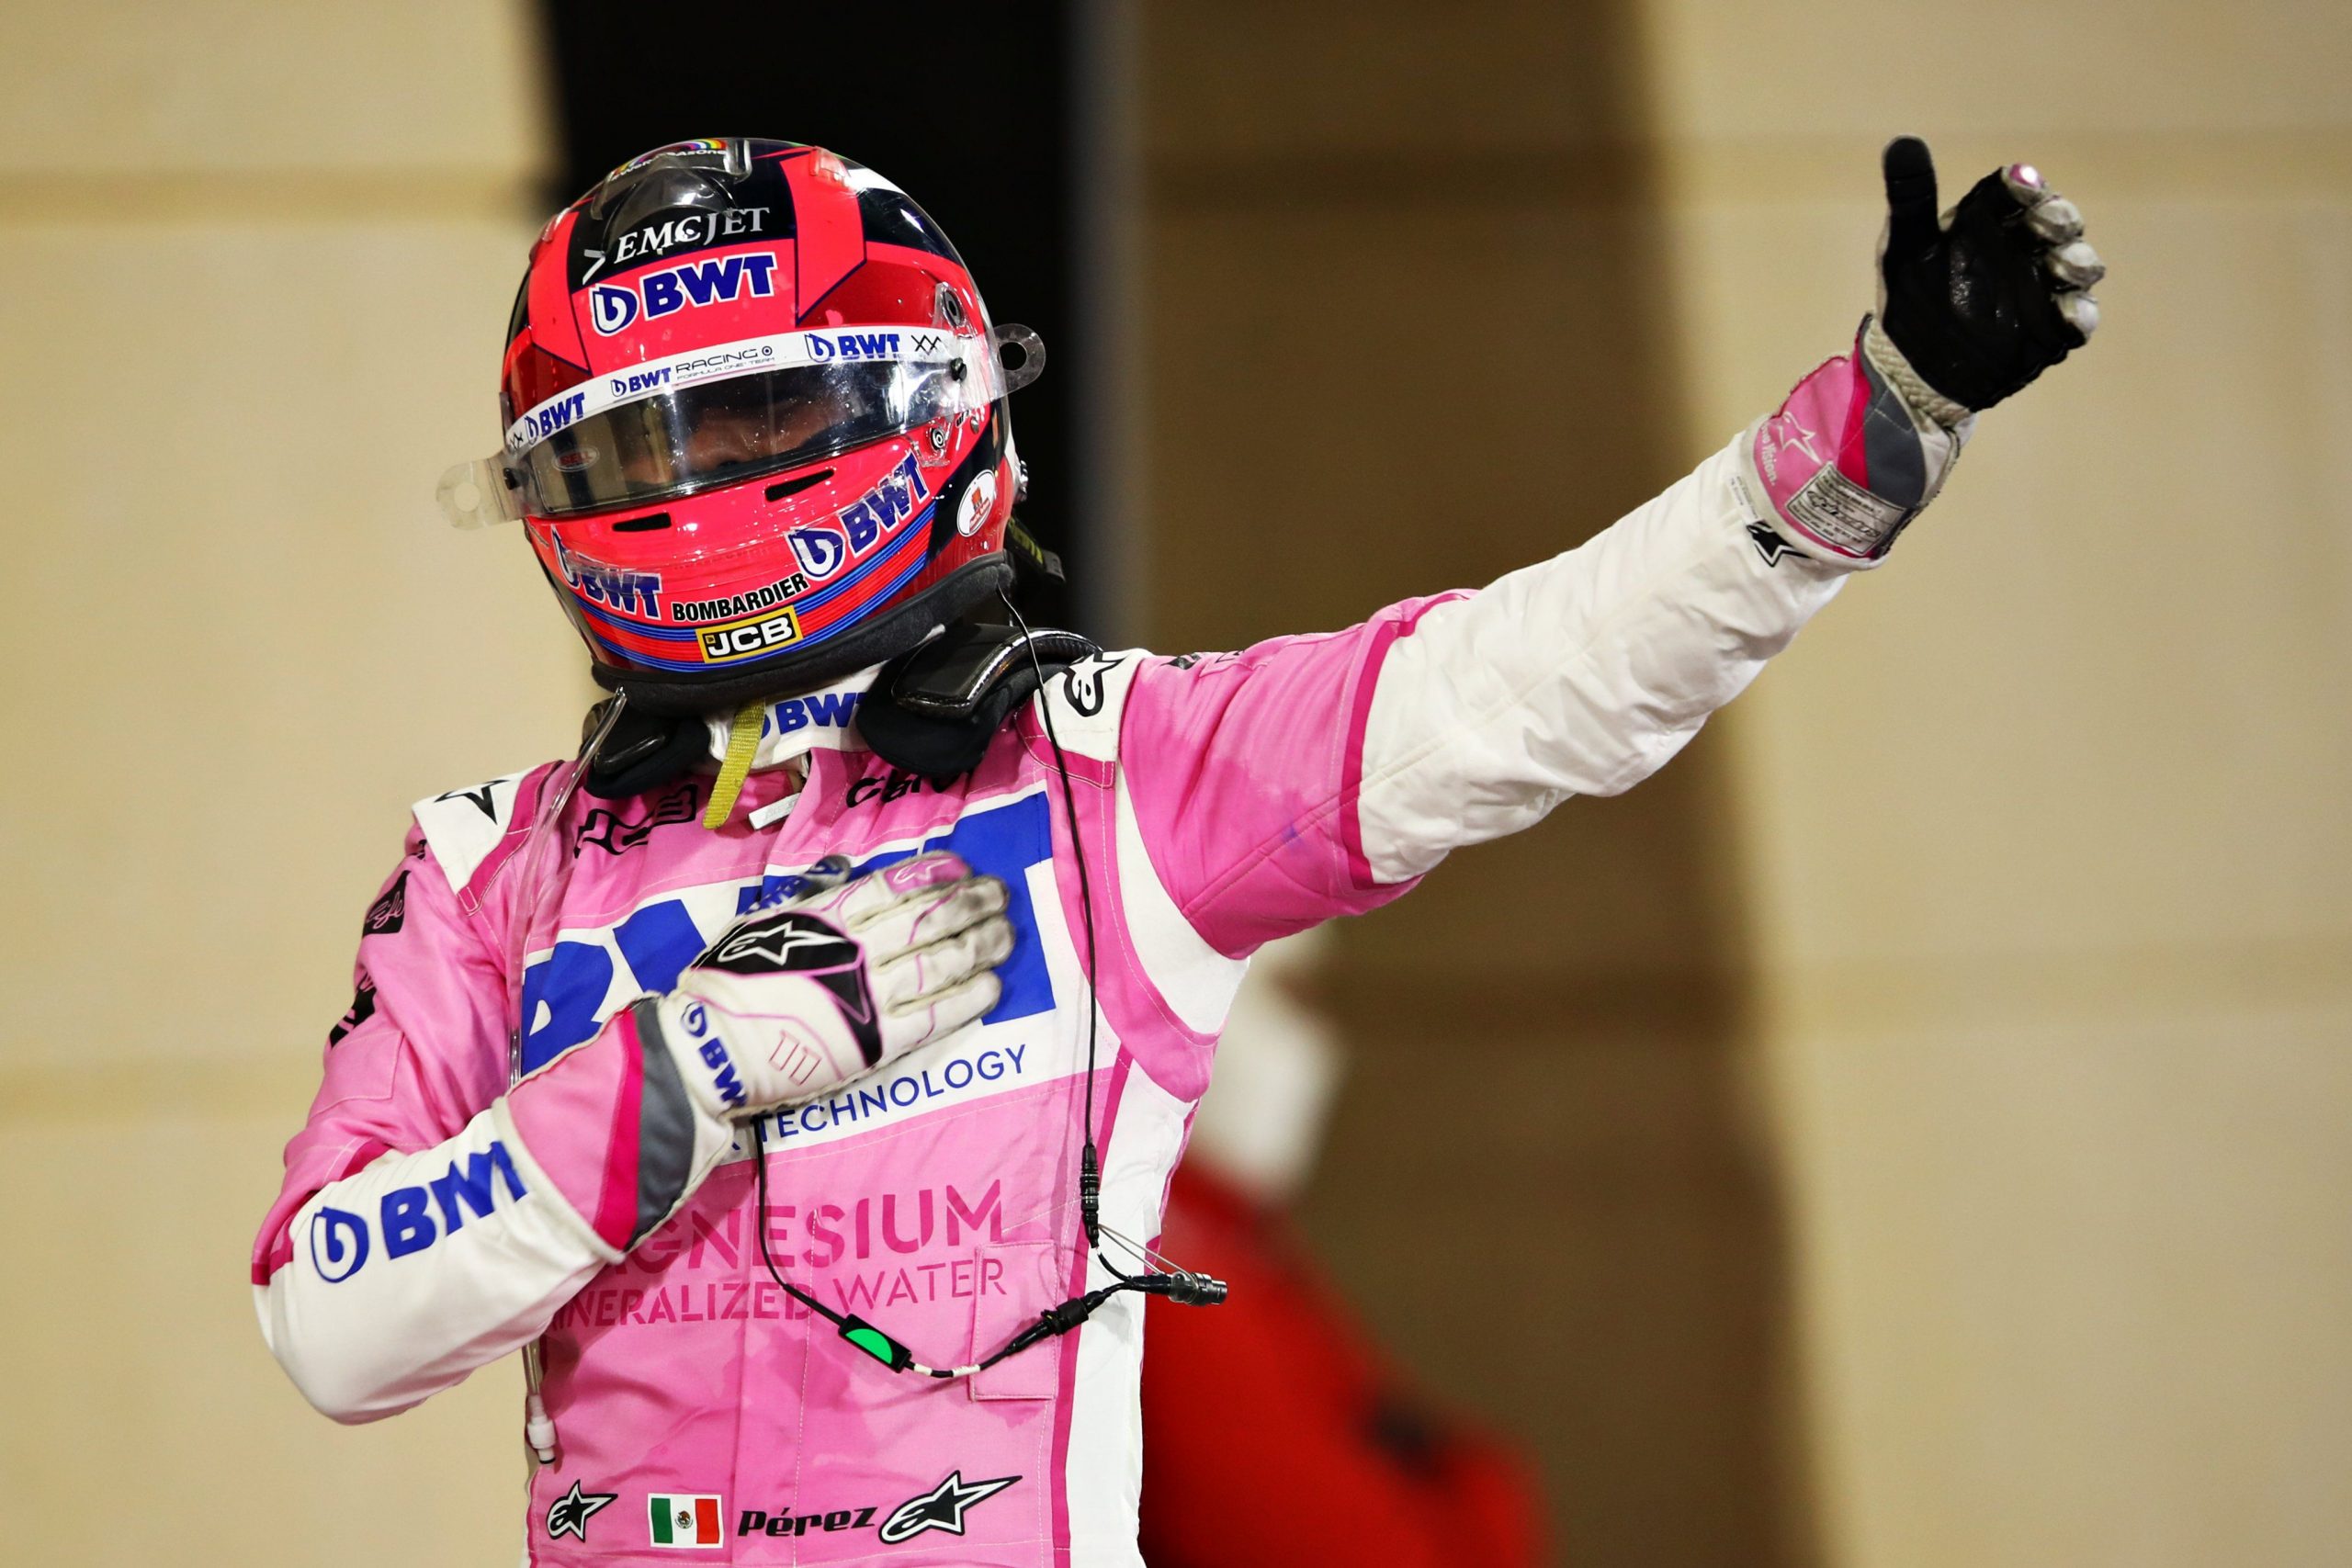 Sergio Perez clinches maiden F1 win from last position at Sakhir Grand Prix